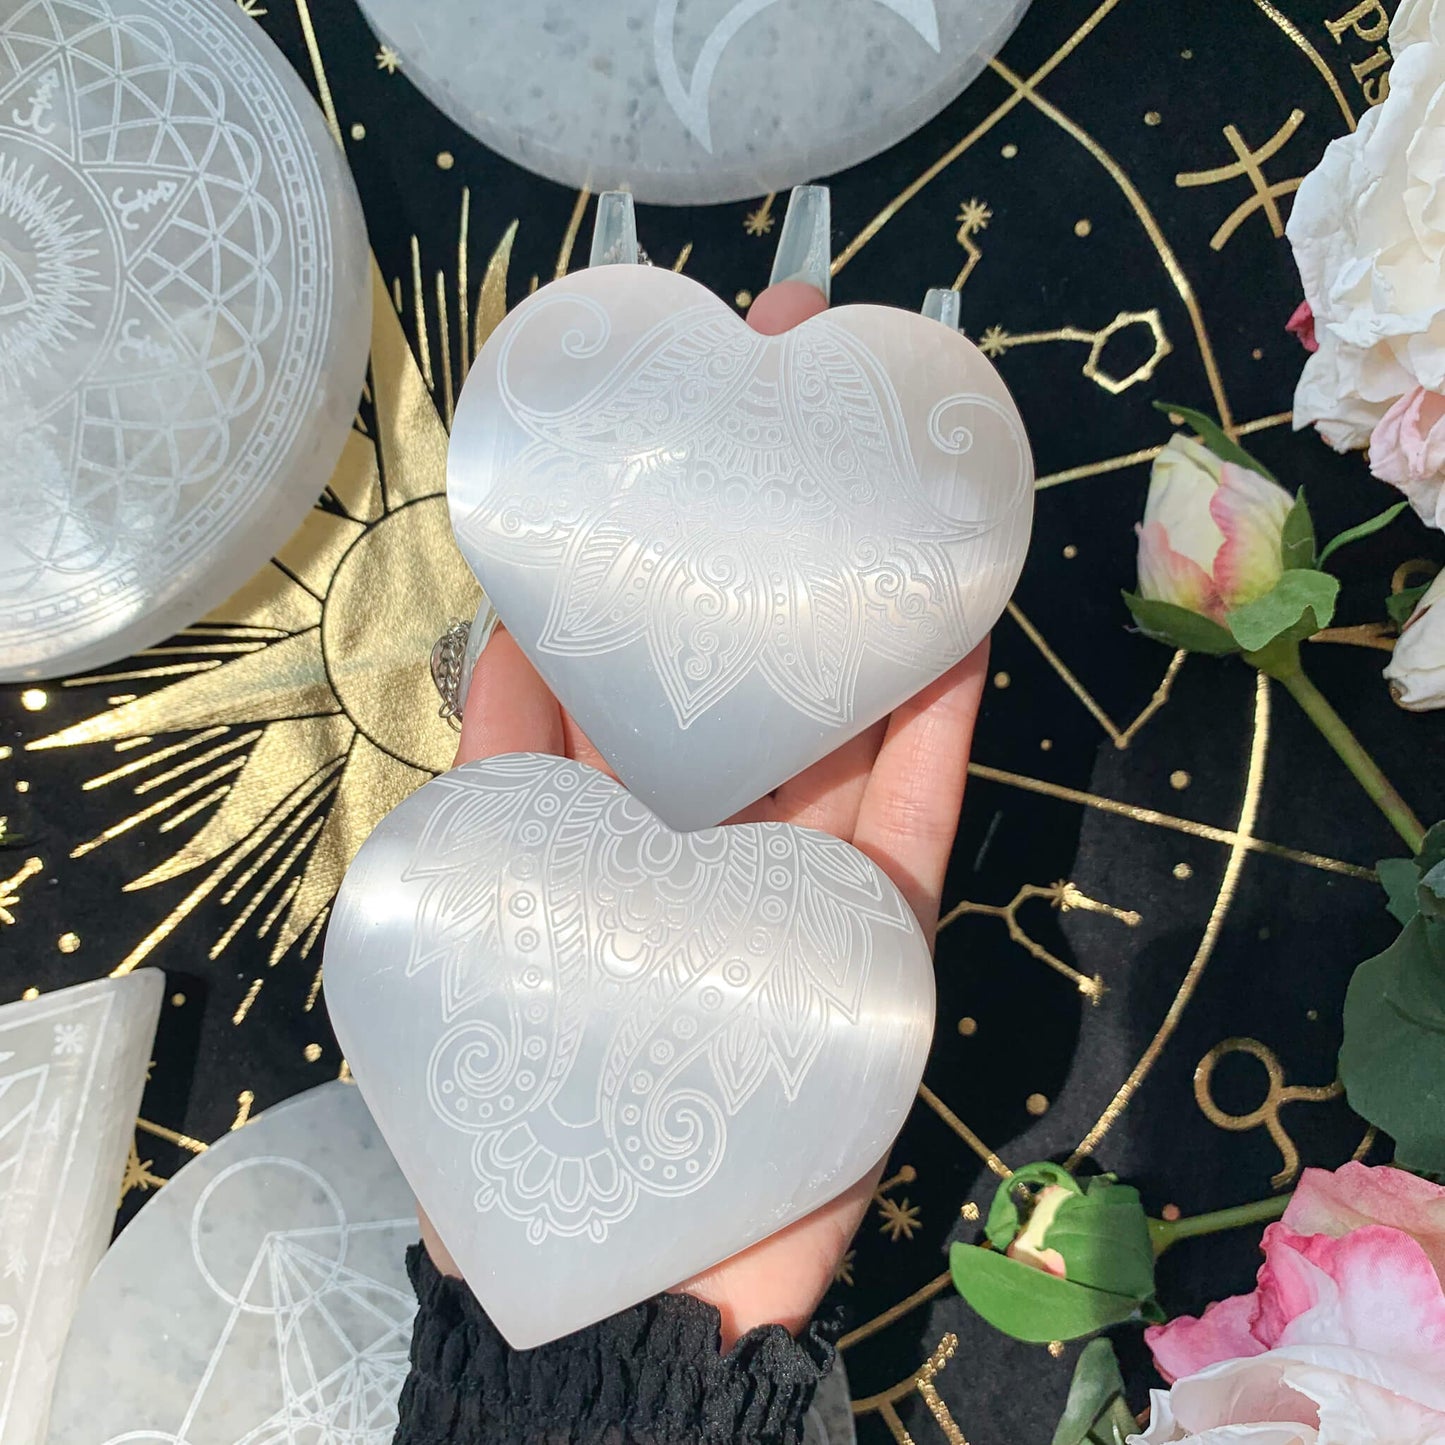 Etched Selenite Crystal Heart/Selenite Crystal Tumbled Stone/Etched Selenite Heart